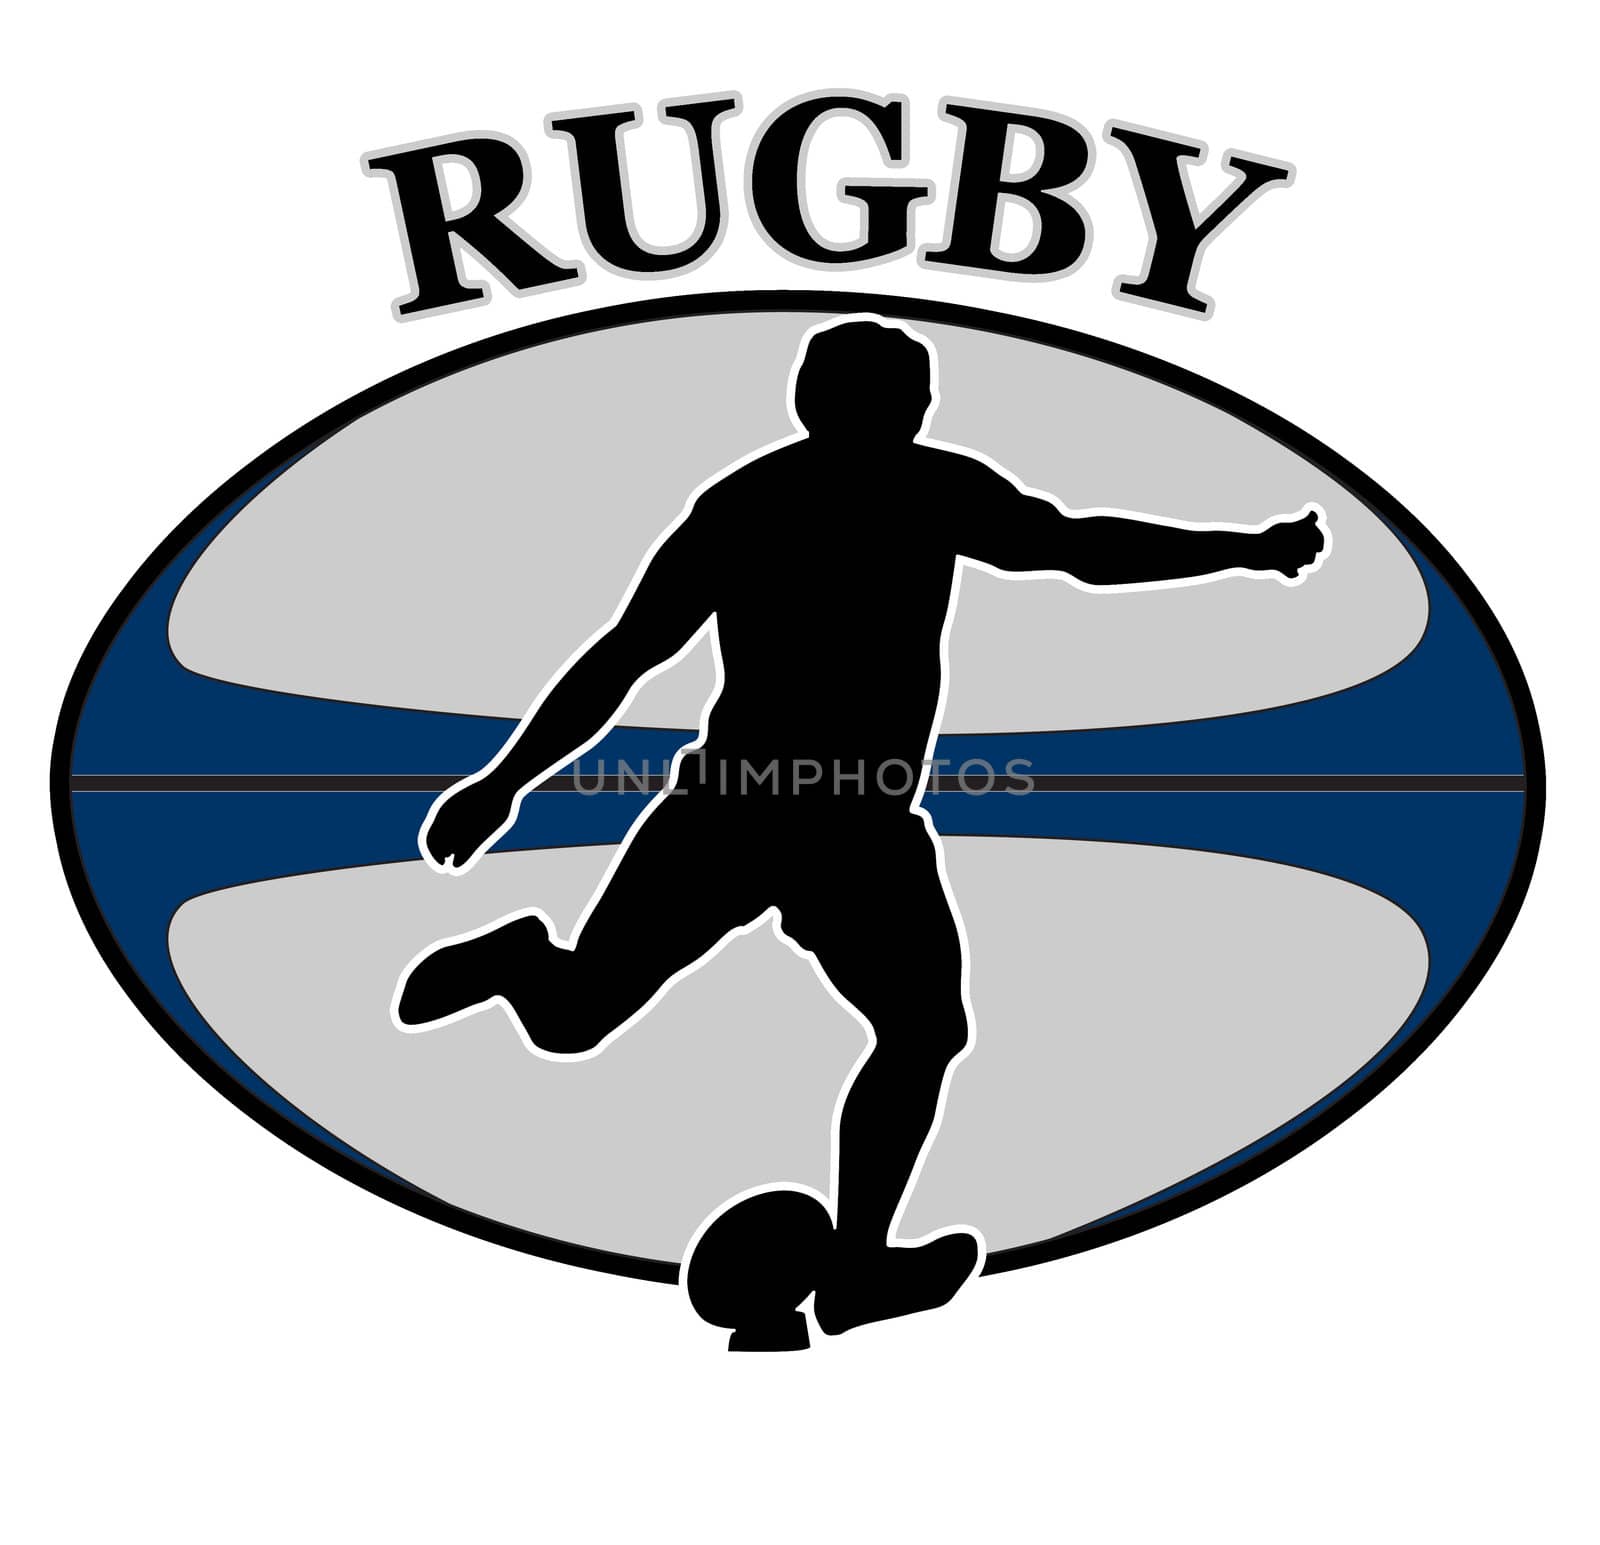 illustration of a rugby player kicking ball with ball in background and words "rugby"